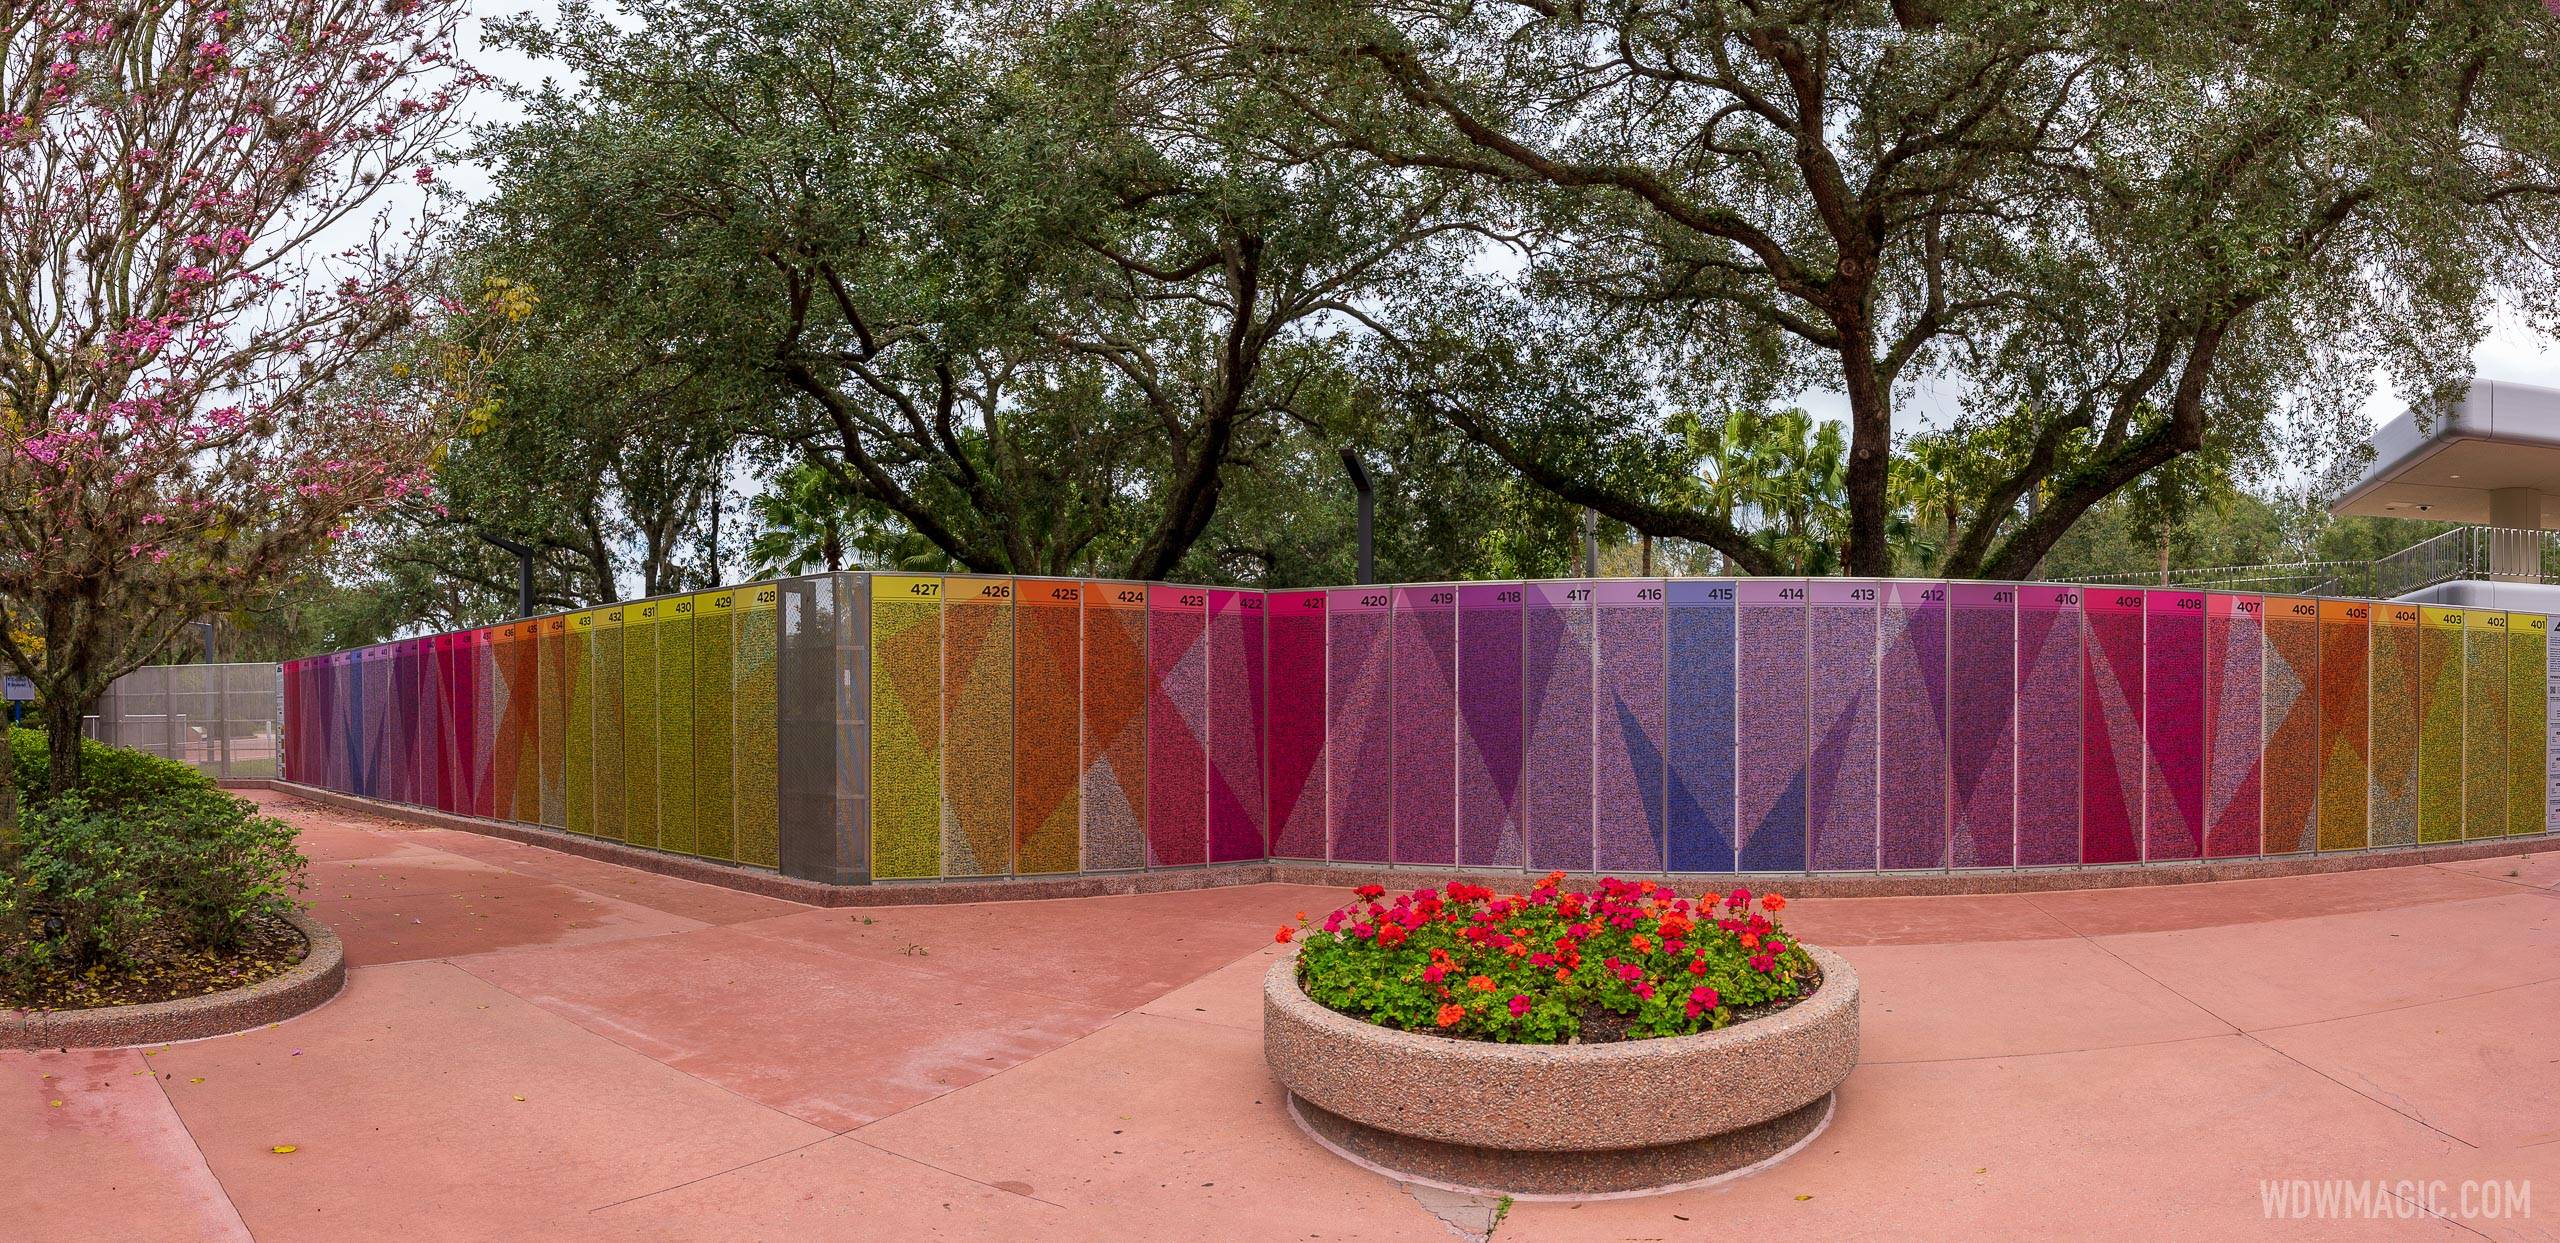 PHOTOS - EPCOT'S Leave a Legacy western side now installed for panels 401 to 452